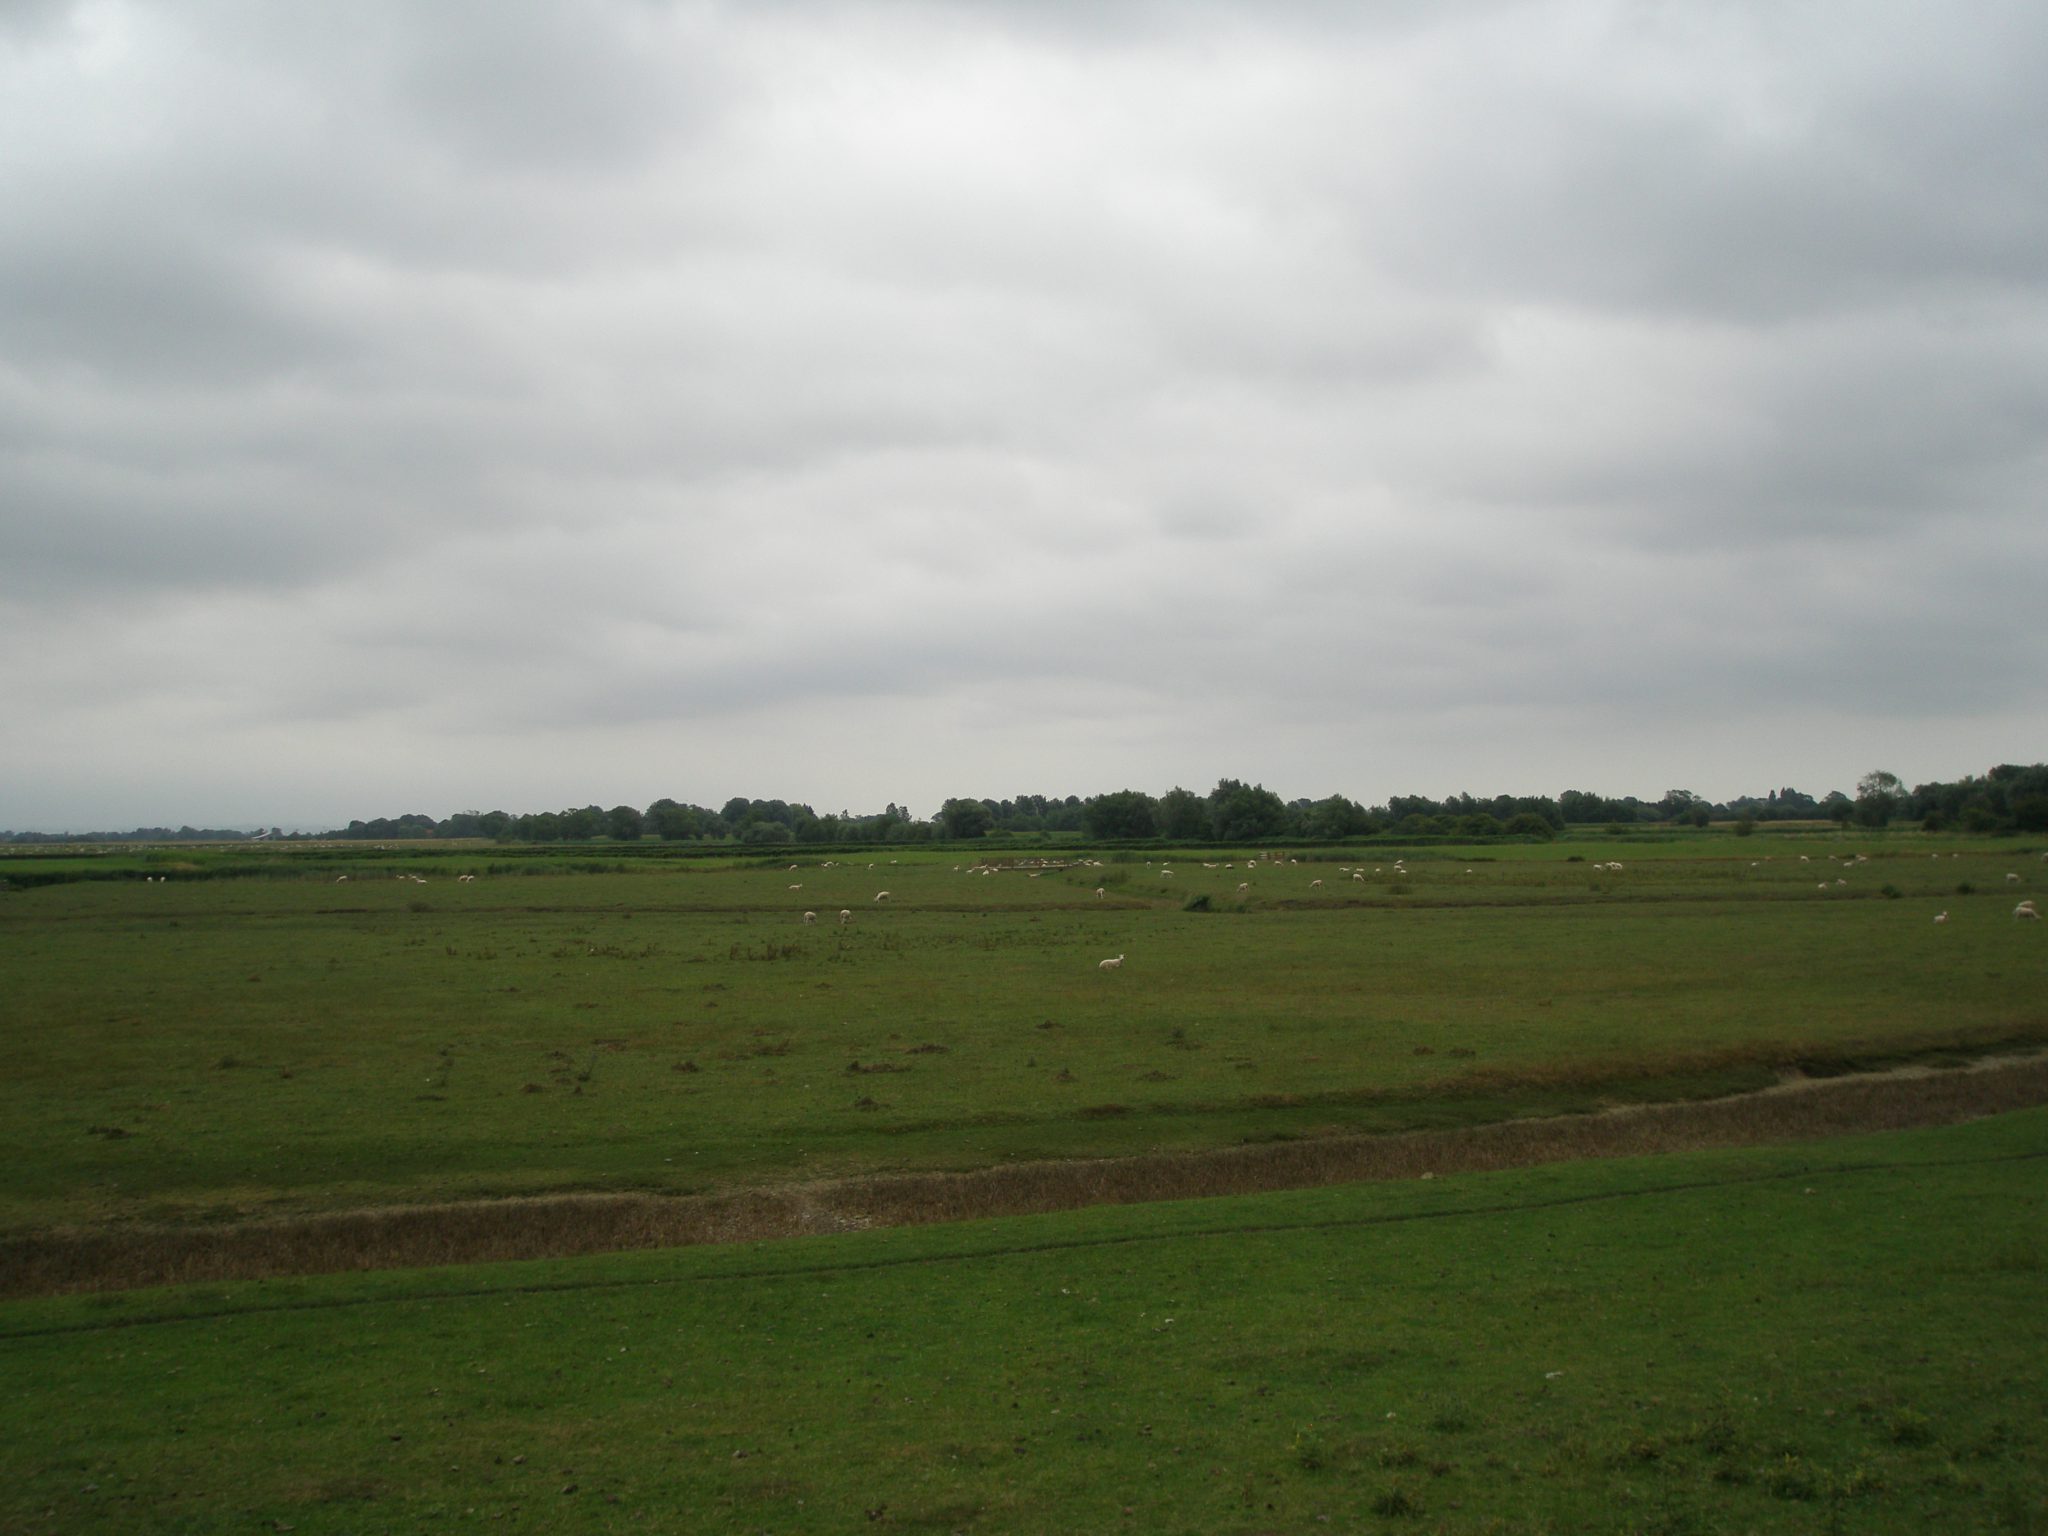 Flocks of sheep, in the fields surrounding St.Thomas Becket Church.